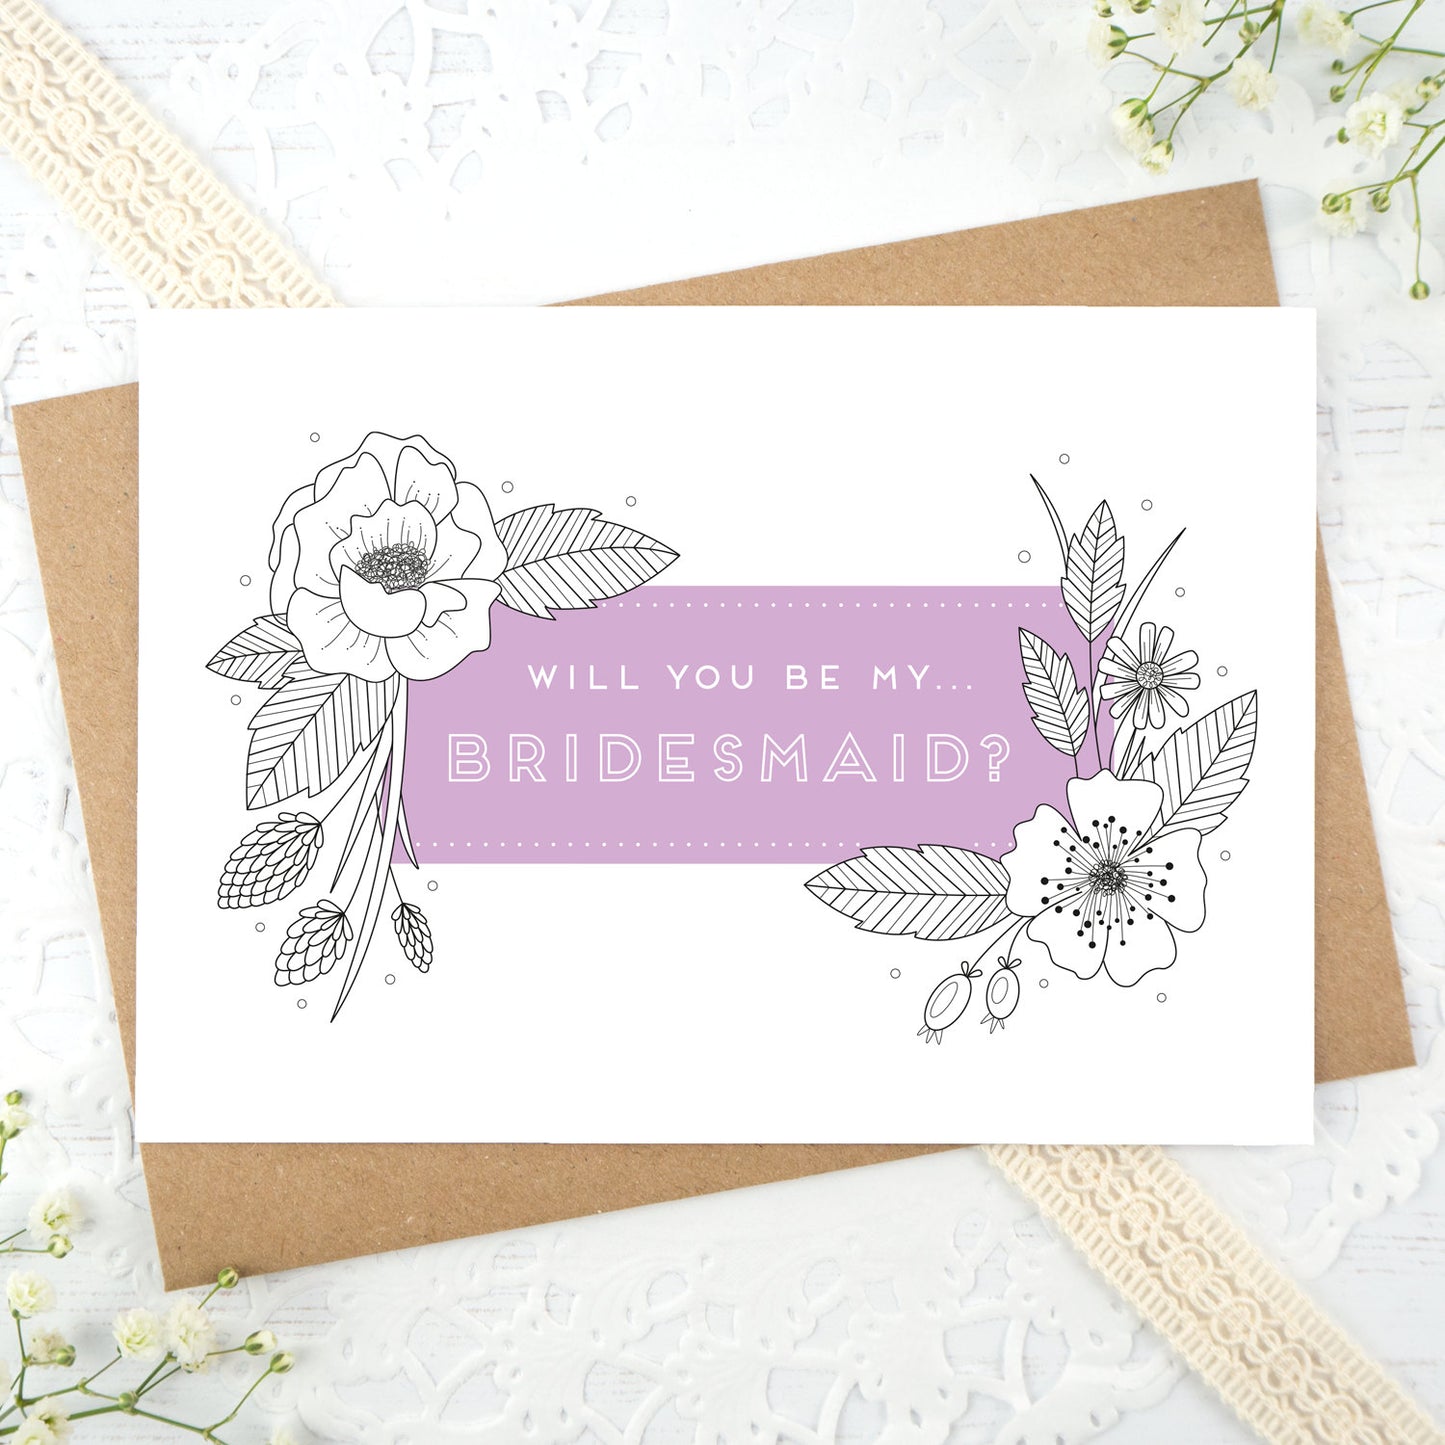 A floral outline, will you be my bridesmaid card in purple